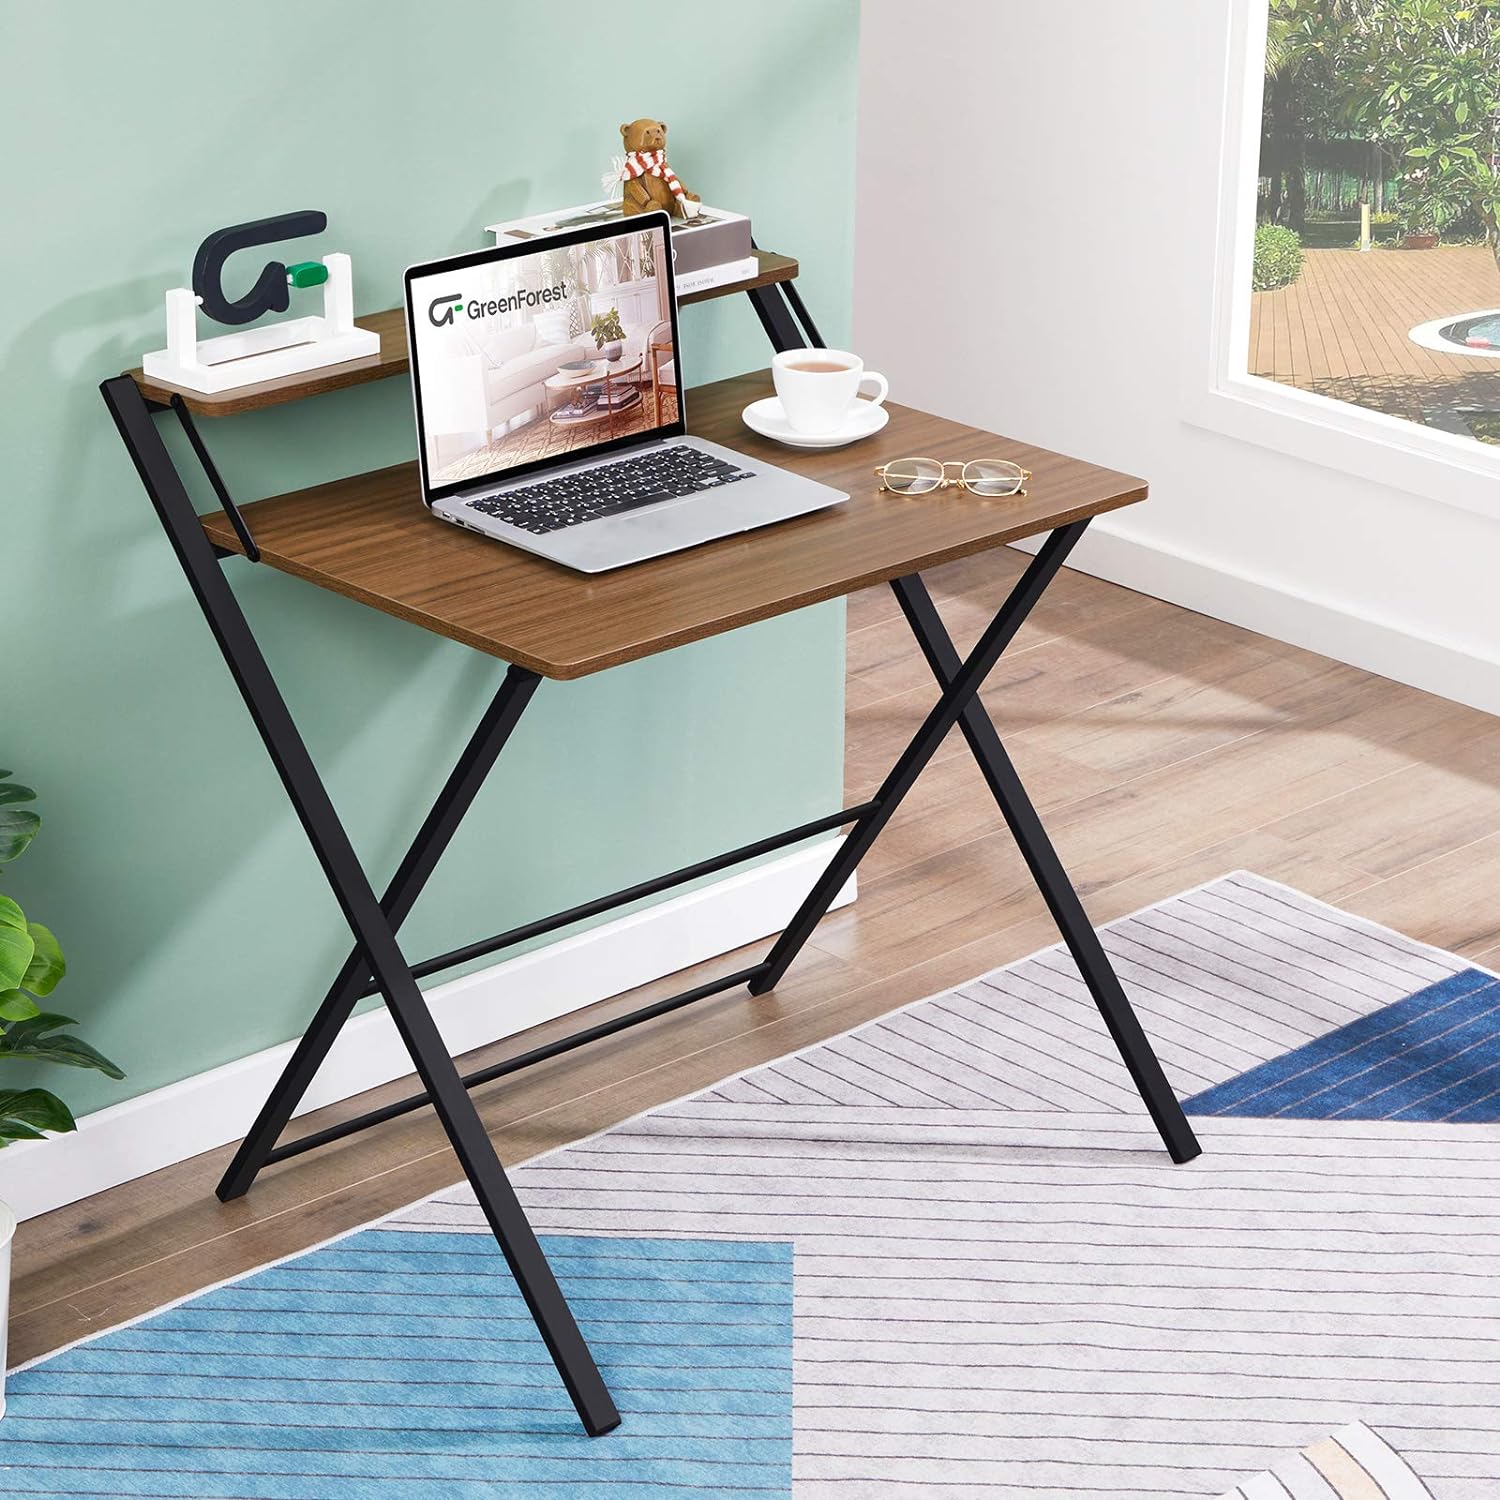 folding desk for small spaces walnut wood tabletop with riser and matte black metal x shaped base convenient temporary workspace ideas for WFH setup affordable tiny space desks